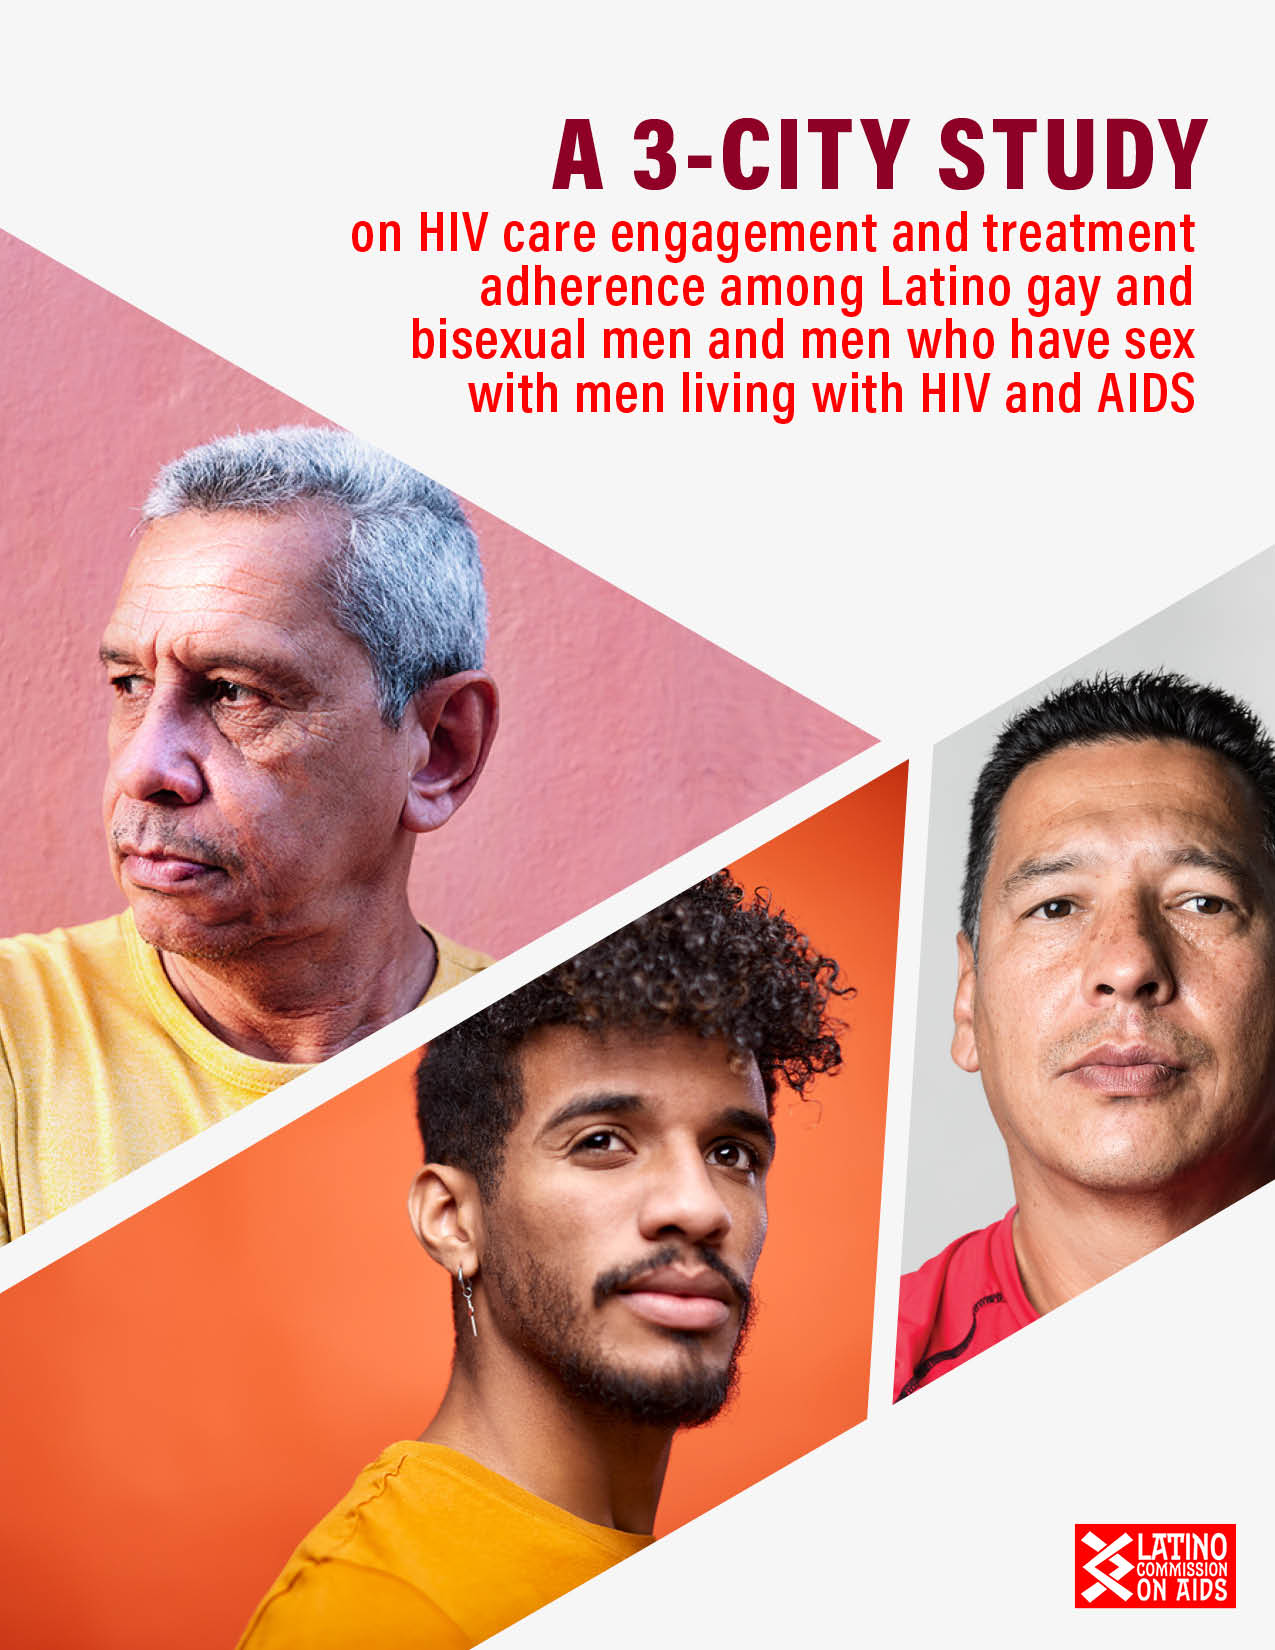 A 3-City Study on HIV Care Engagement and Treatment Adherence Among Latino MSM Living with HIV